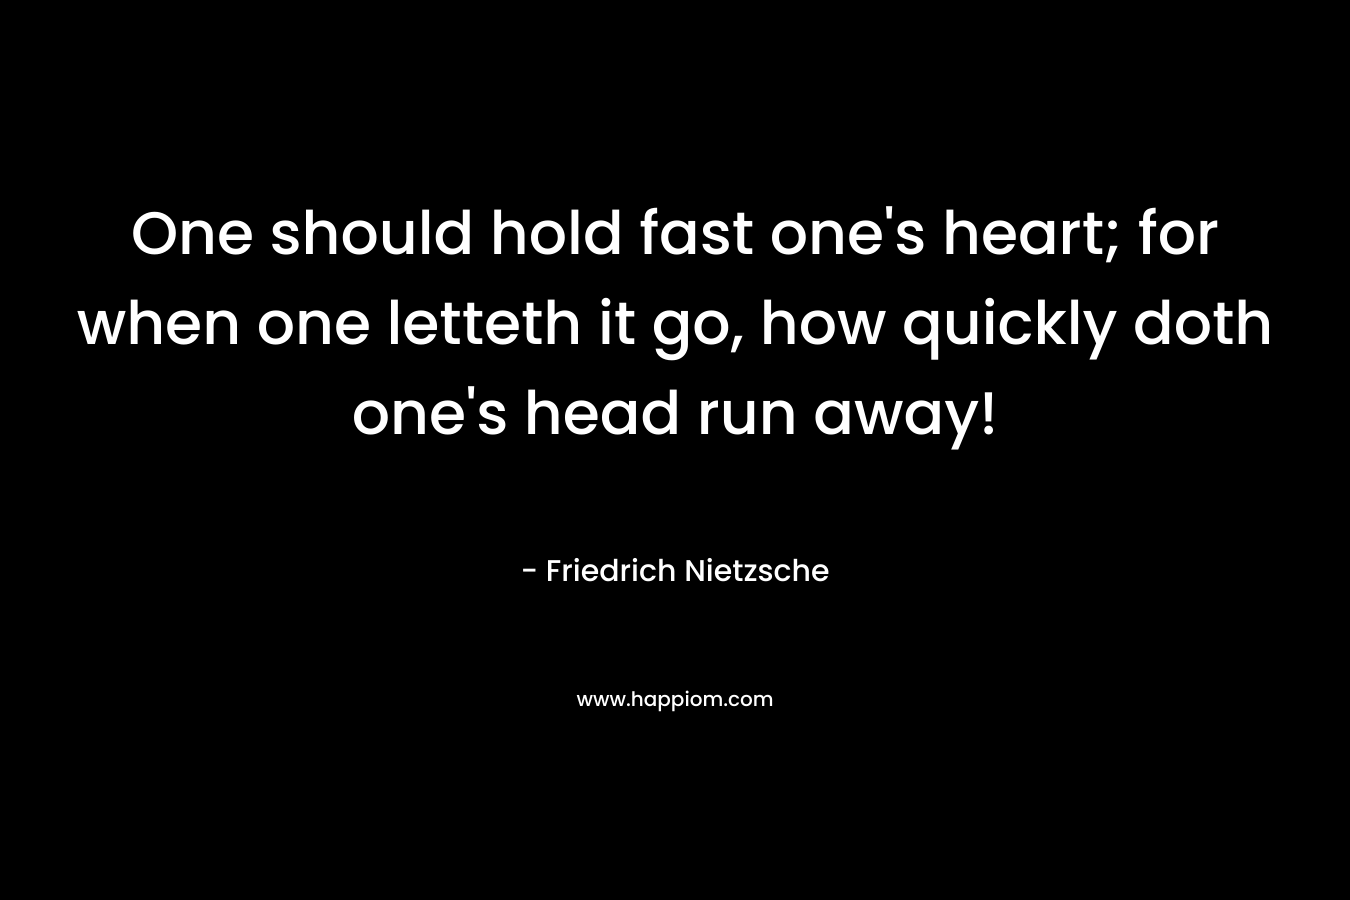 One should hold fast one's heart; for when one letteth it go, how quickly doth one's head run away!